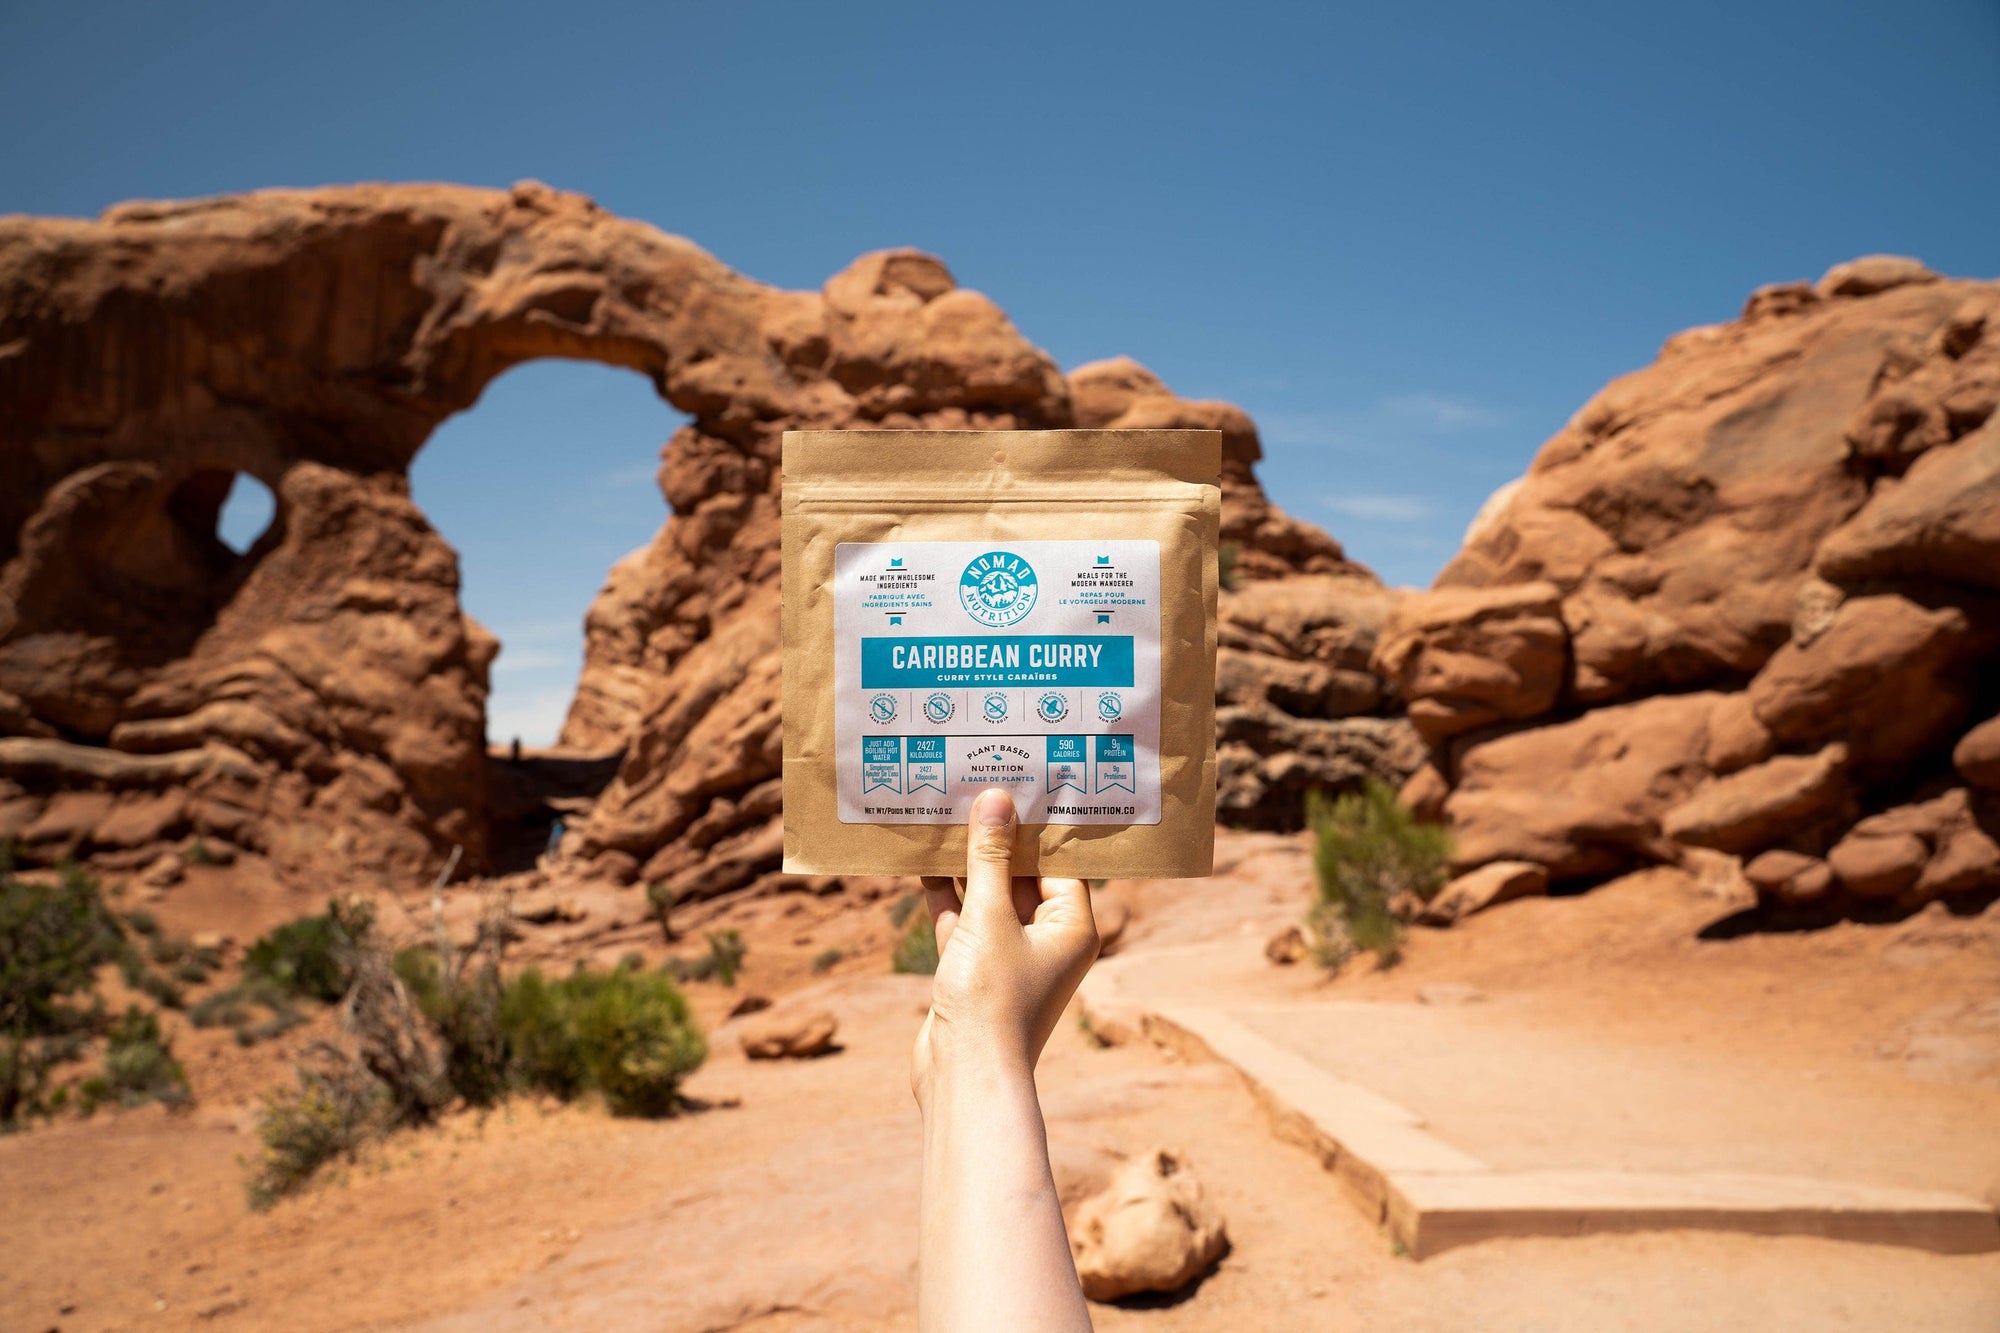 Nomad Nutrition Carribean Curry, vegan dehydrated adventure, camping, plant-based, gluten-free meal picture at Double Arch Trail, Arches National Park. 